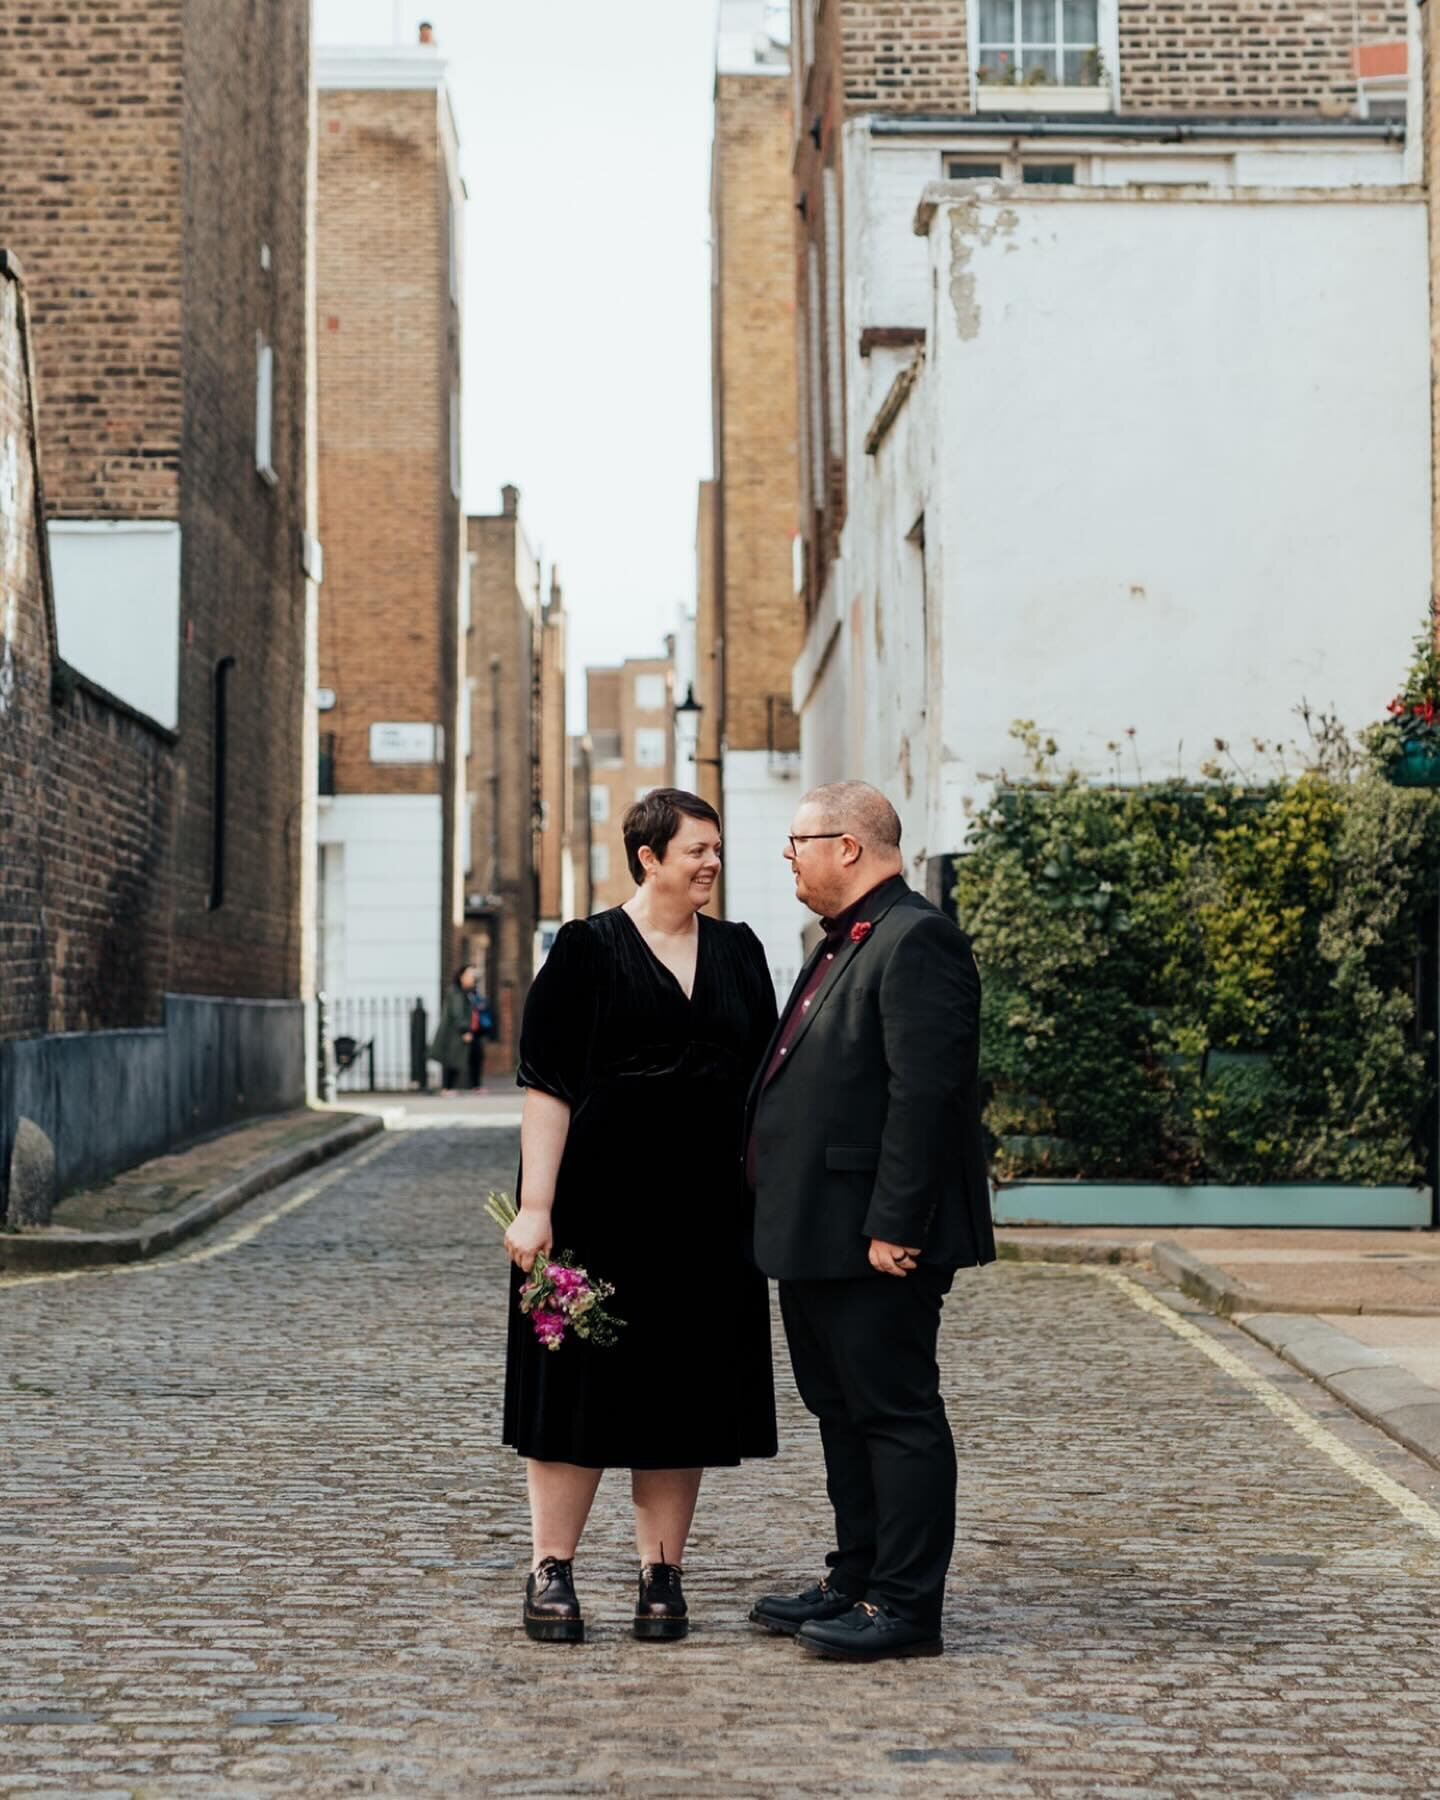 Hannah &amp; Chris &hearts;️ 23.03.2024. I had a brilliant whirlwind afternoon trip around London with H&amp;C last week Saturday! Starting off with getting married in the lovely Soho room at Marylebone Town Hall, we popped into a park, escaped a hai